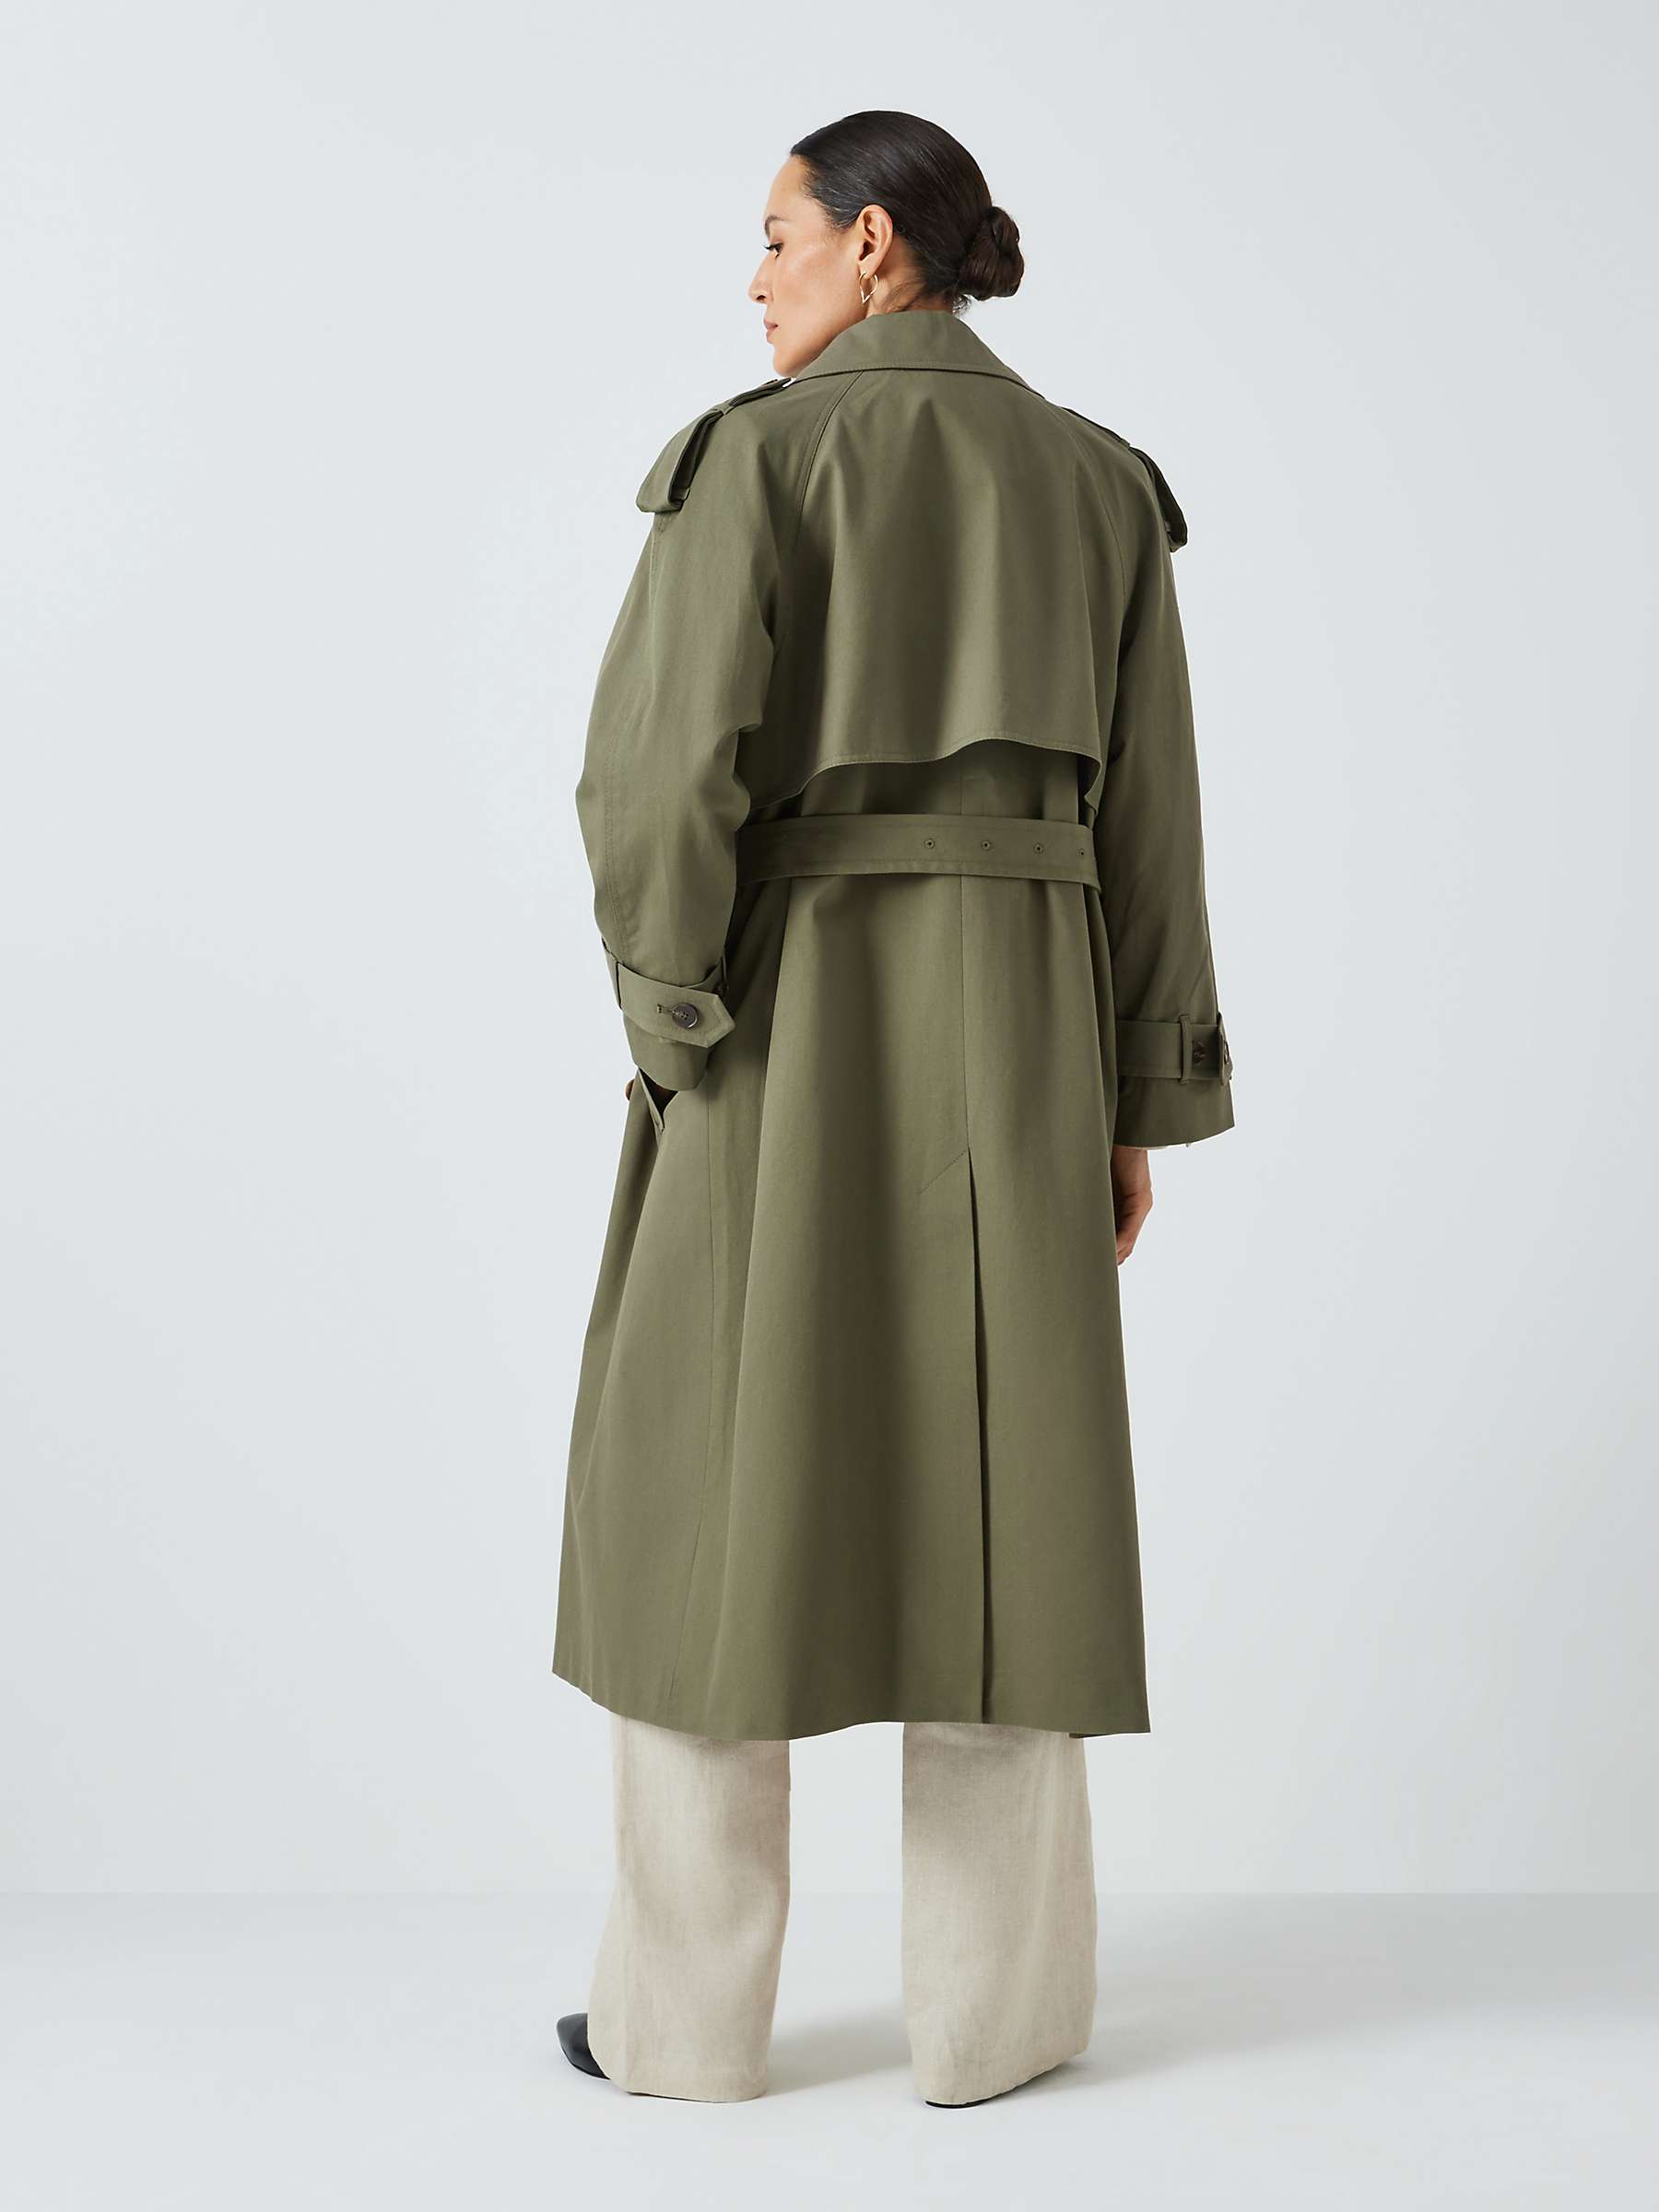 Buy John Lewis Contemporary Trench Coat Online at johnlewis.com